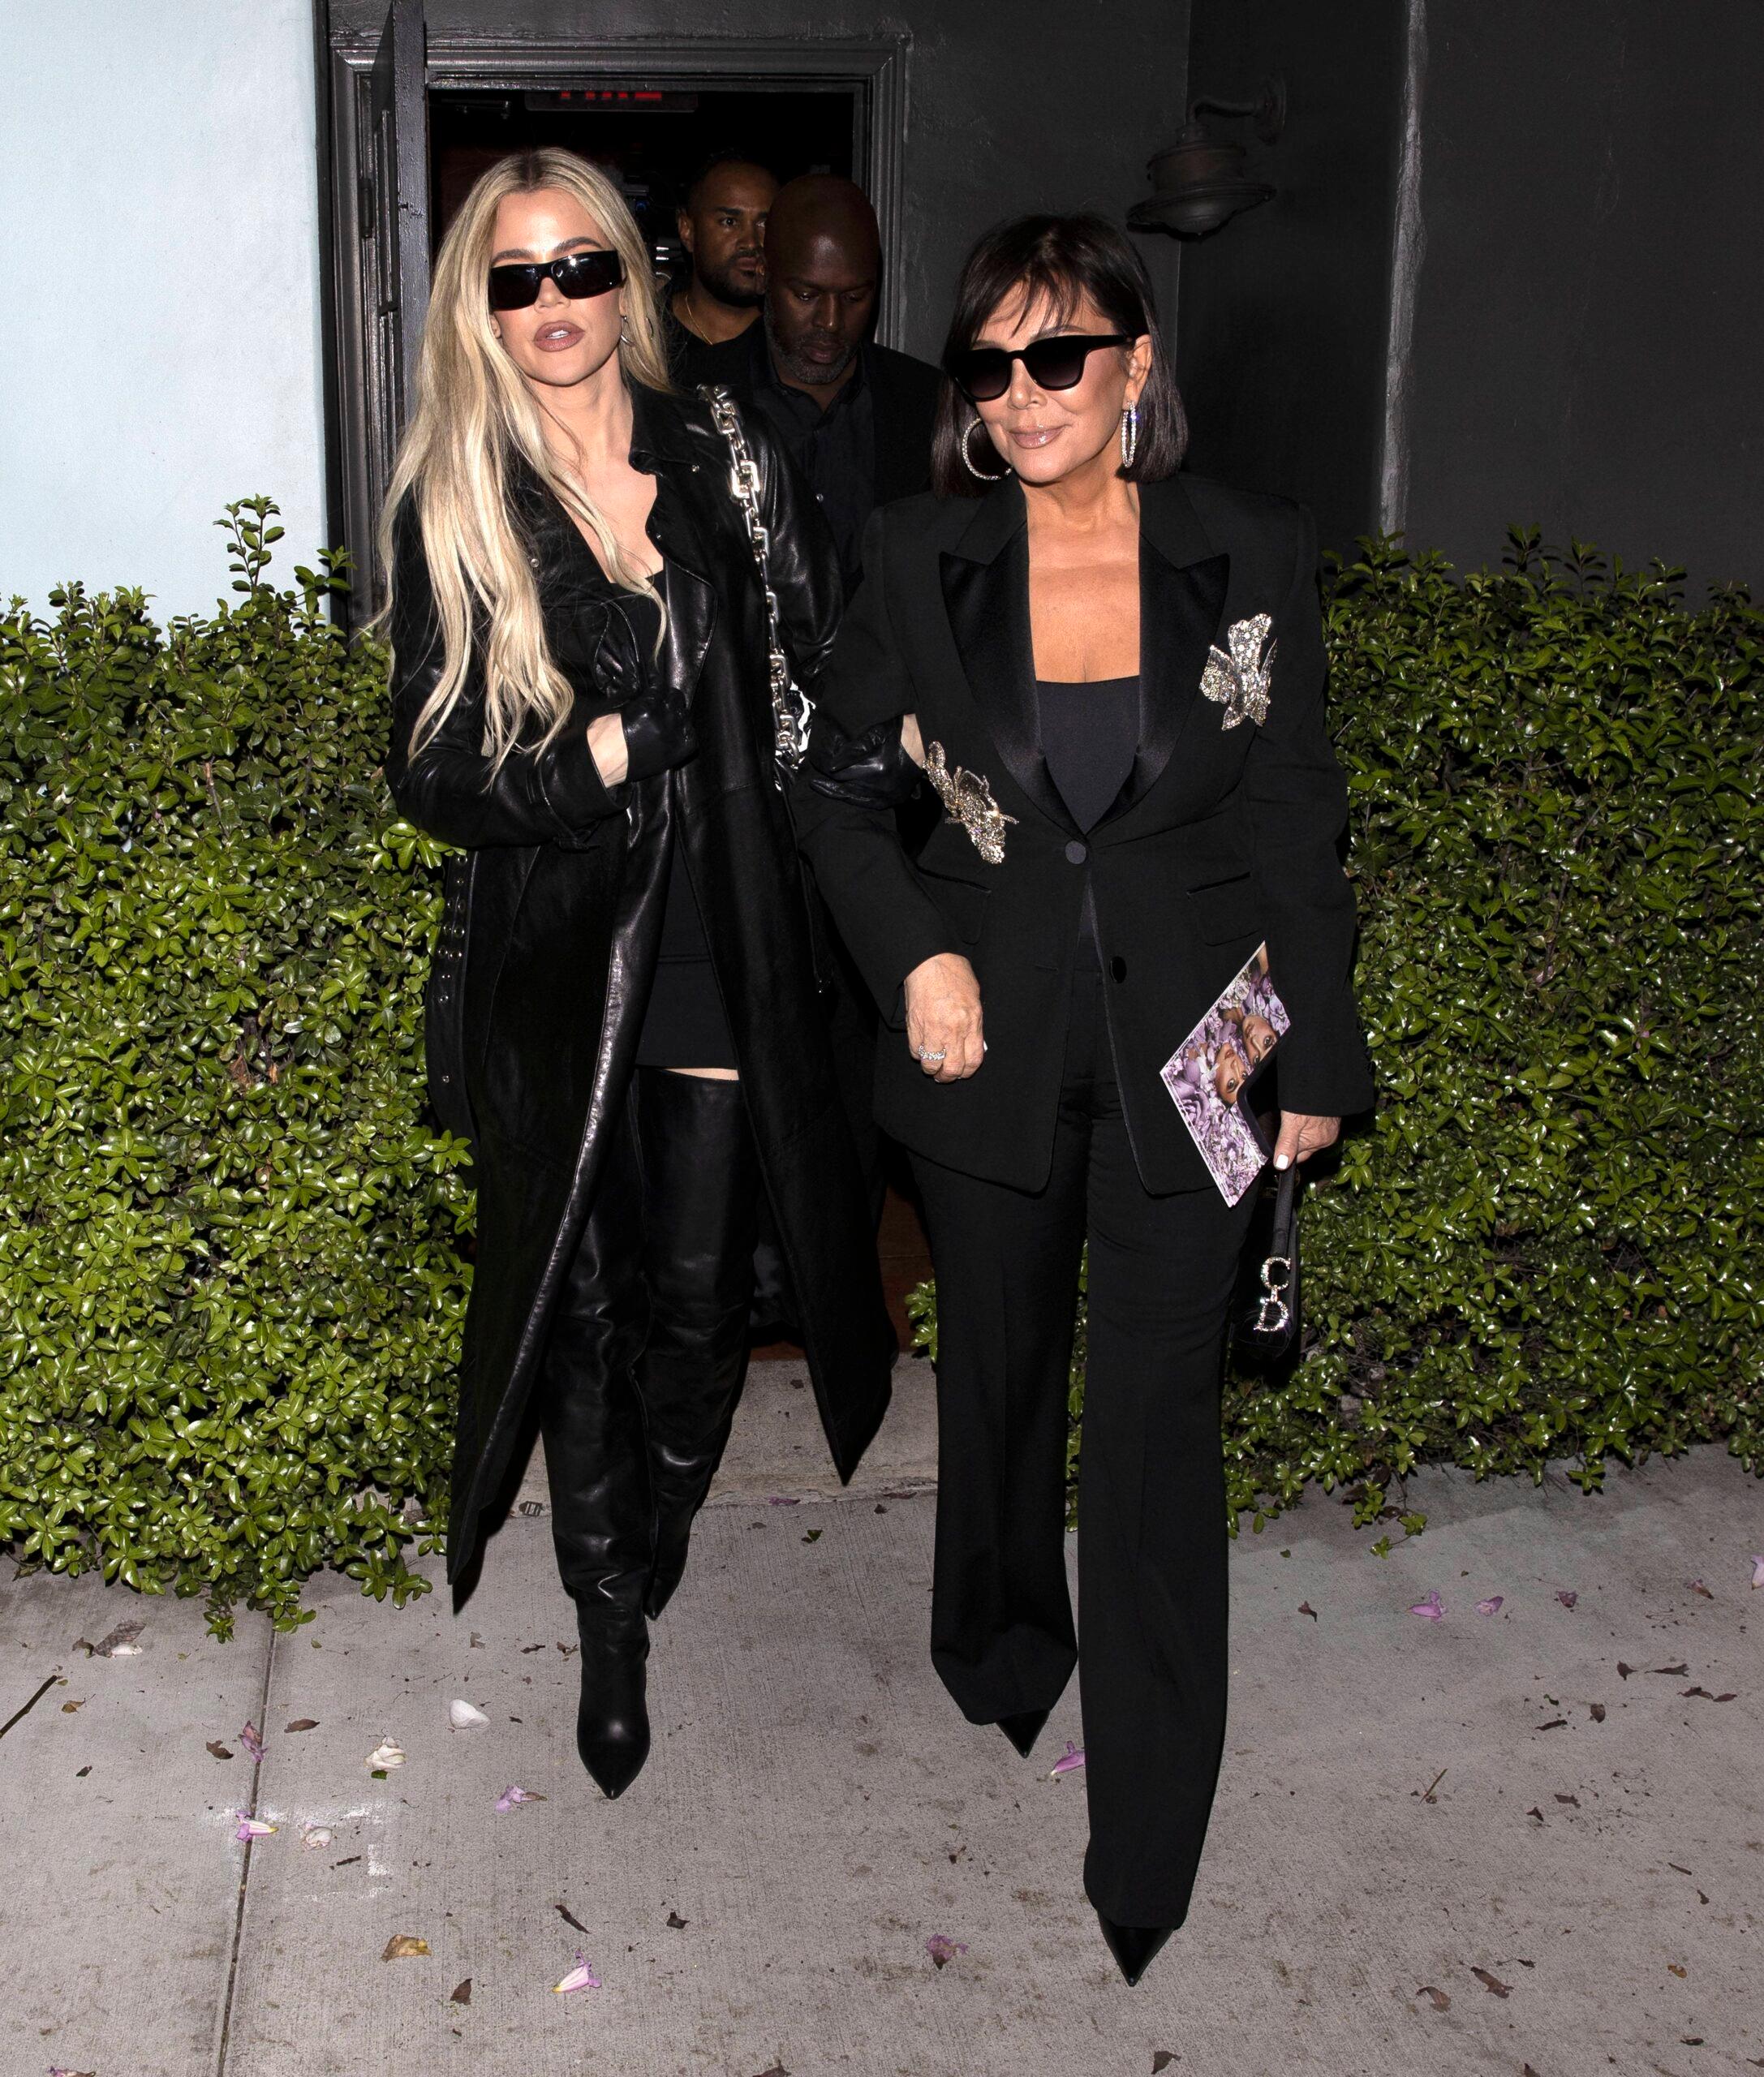 Khloe Kardashian, Kris Jenner and Korey Gamble leave dinner together at Osteria Mozza in Hollywood, CA